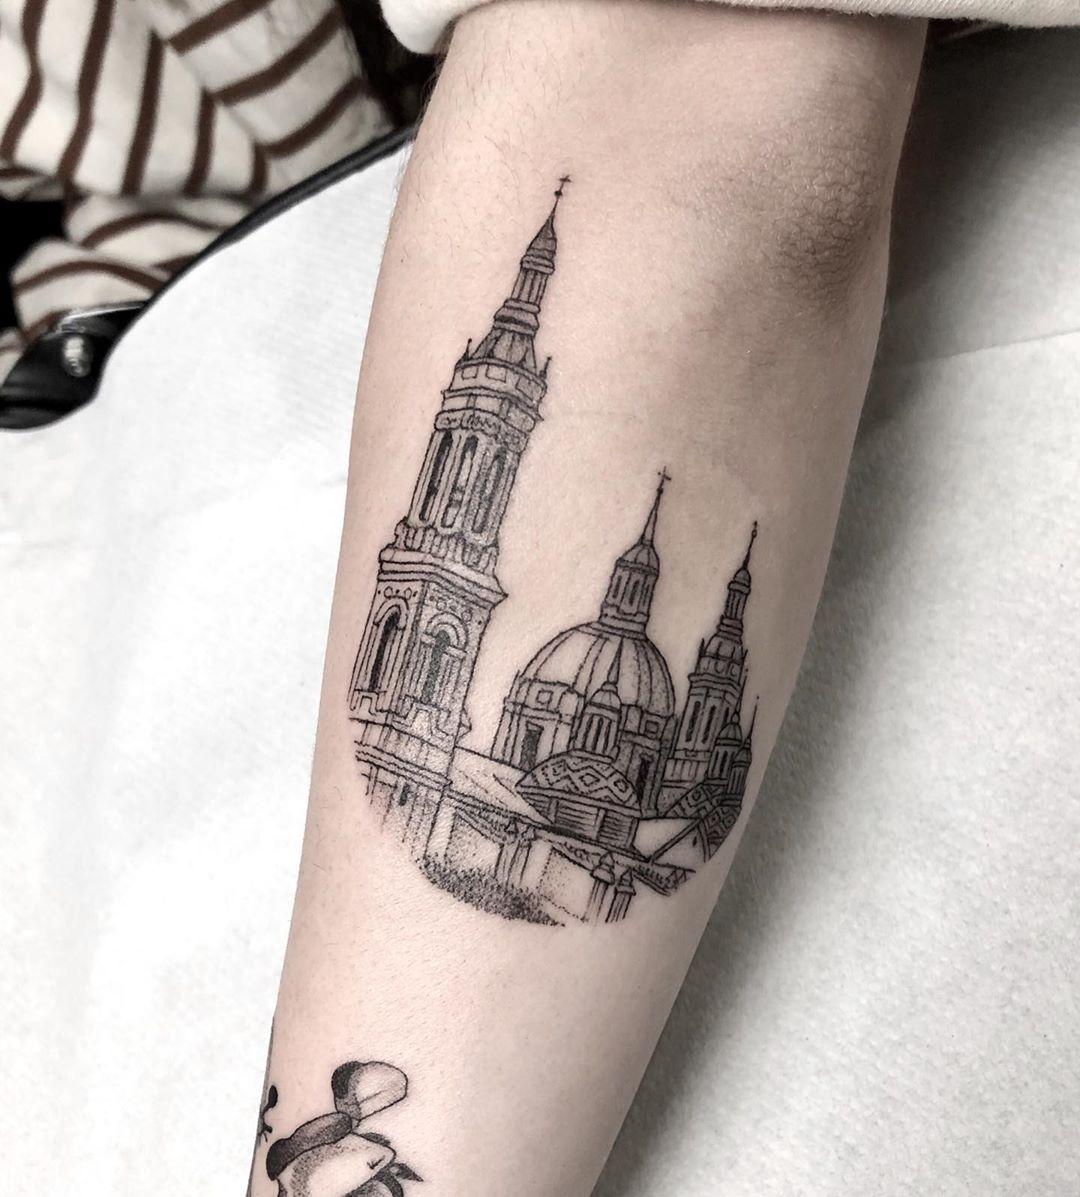 Cathedral-Basilica of Our Lady of the Pillar tattoo by @isaarttattoo